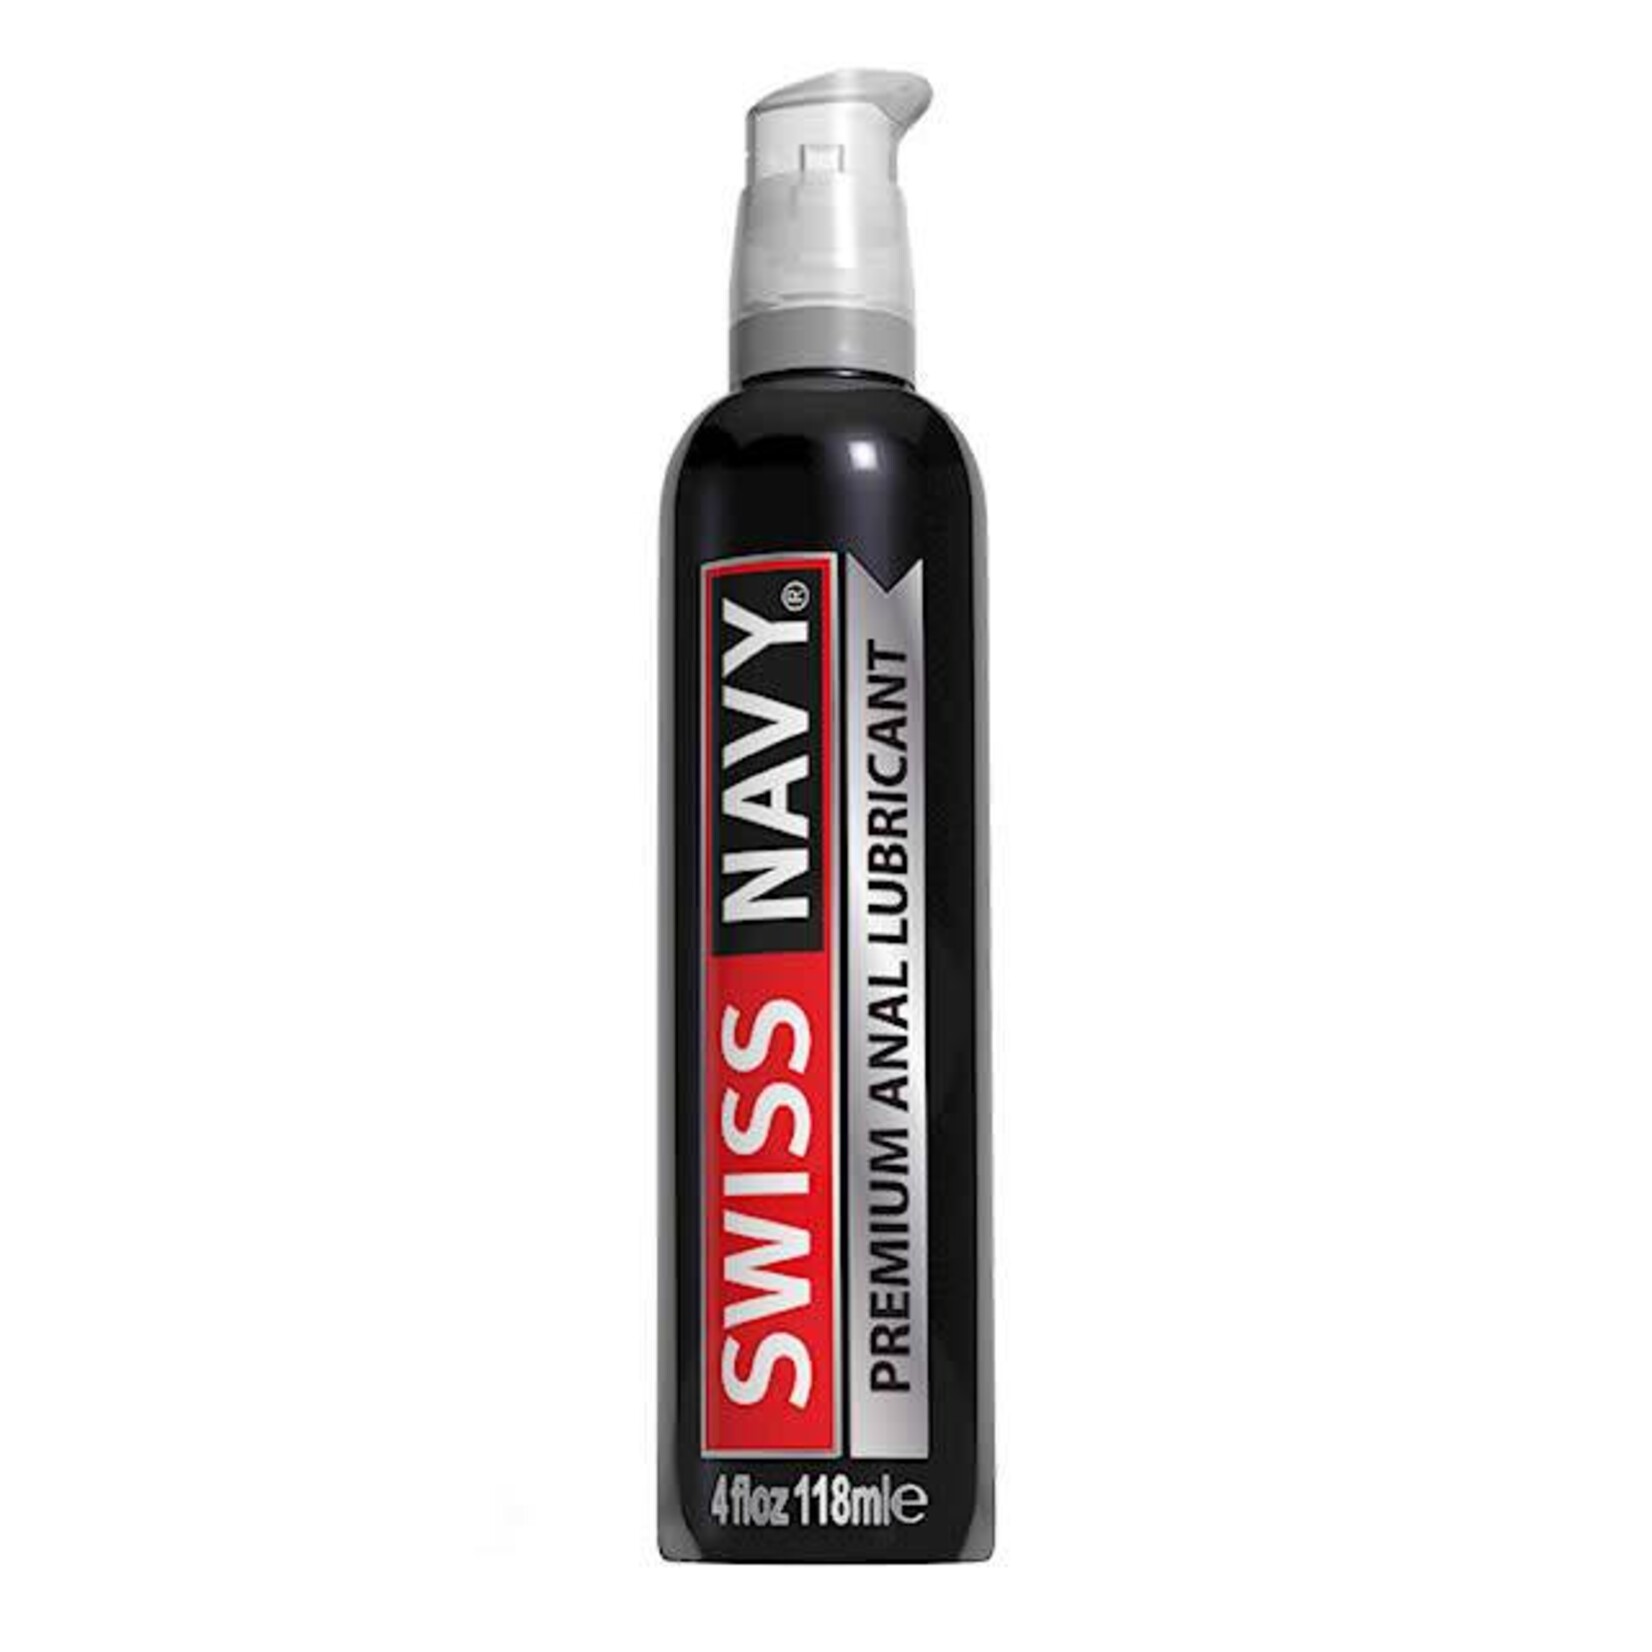 M.D. Science Lab Swiss Navy Silicone-Based Anal Lubricant 4oz